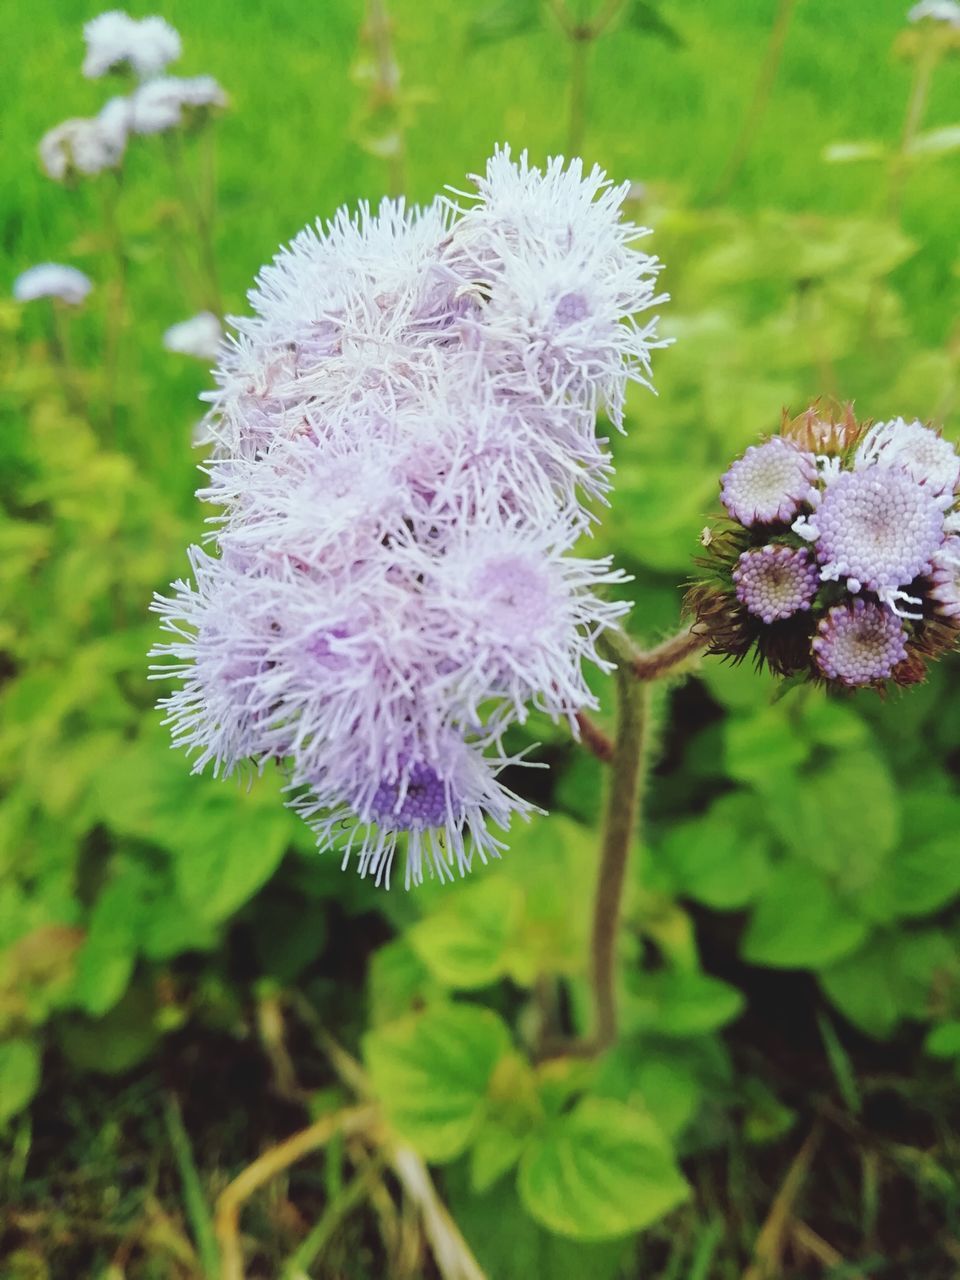 flower, plant, flowering plant, beauty in nature, freshness, nature, close-up, purple, growth, fragility, flower head, inflorescence, no people, herb, focus on foreground, wildflower, petal, day, thistle, botany, outdoors, plant part, blossom, leaf, food, green